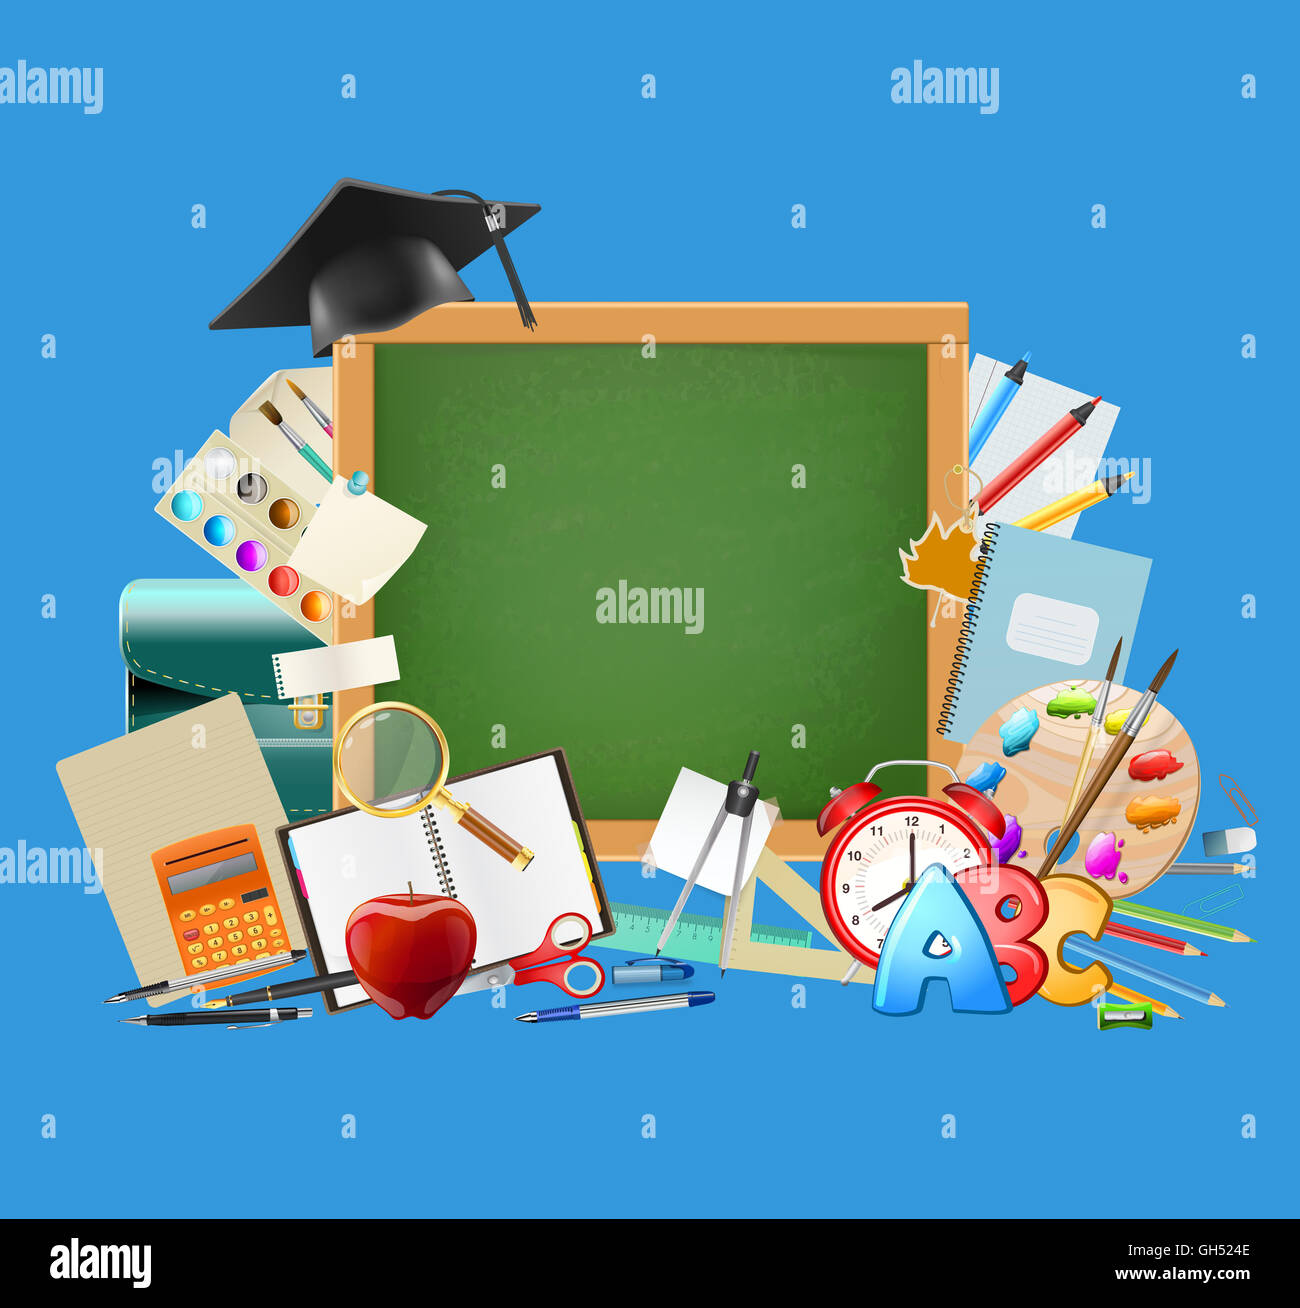 Back to school blue background with chalkboard, graduation cap, school supplies, education workplace accessories Stock Photo